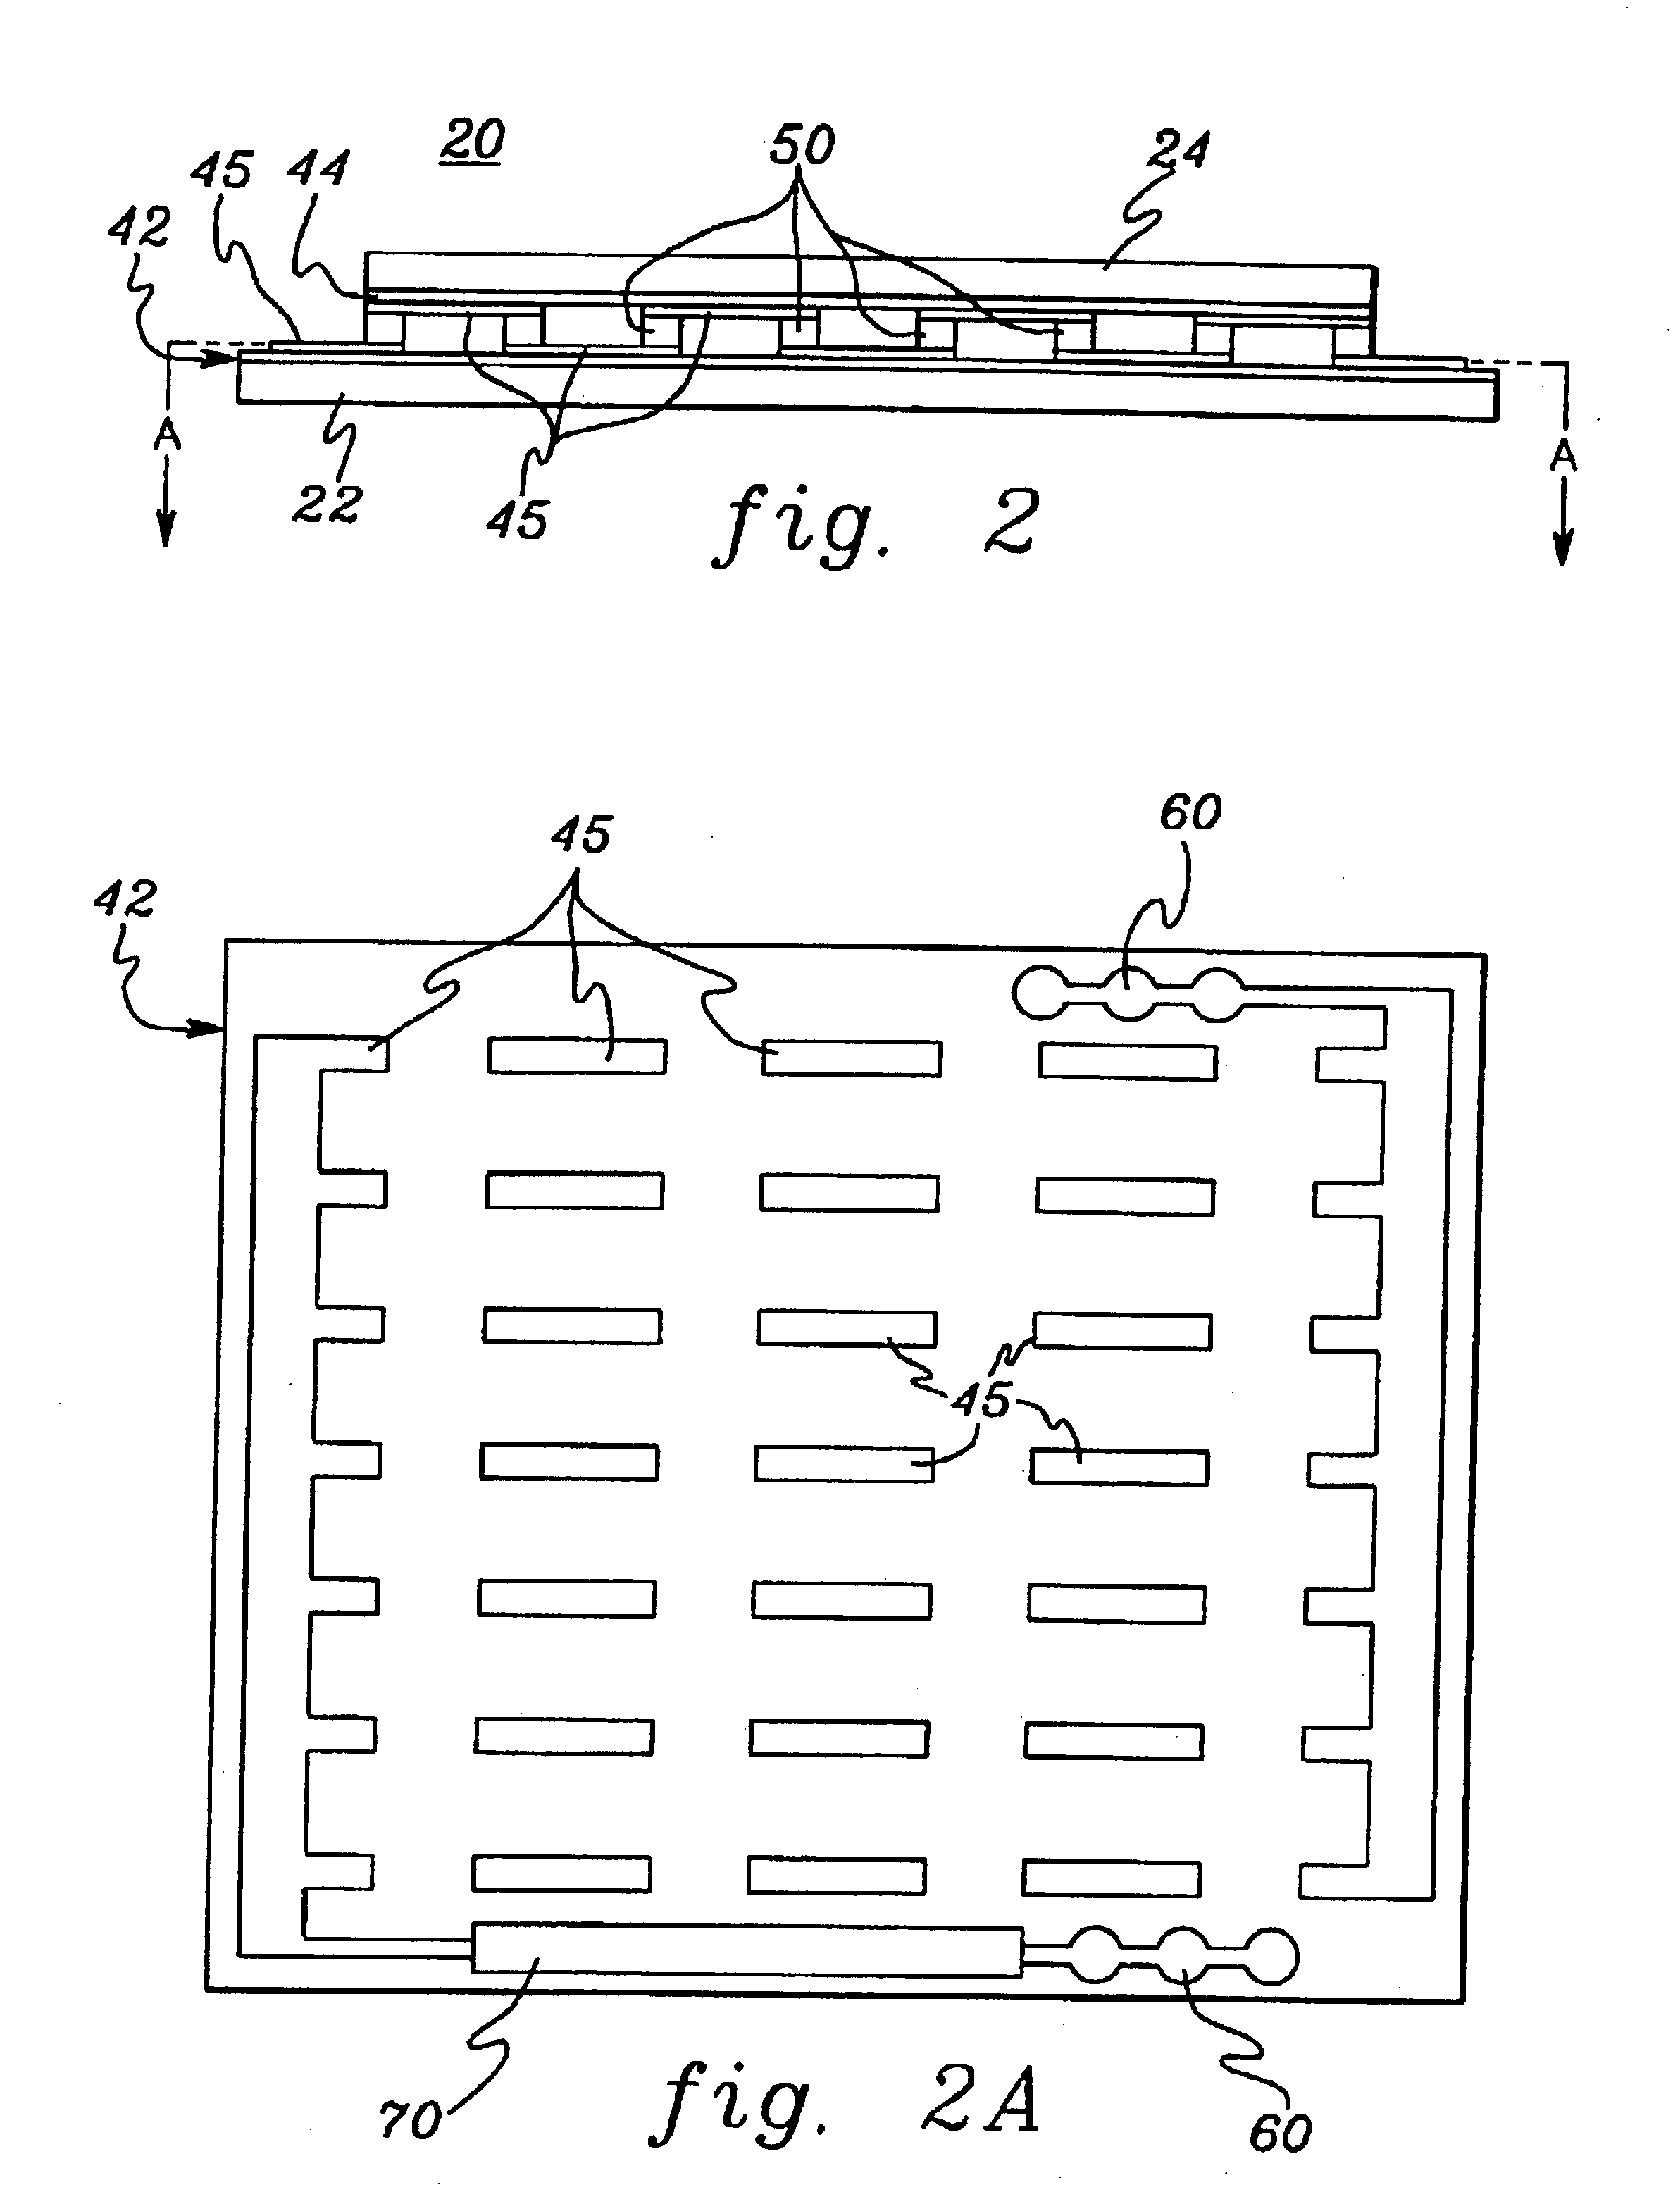 Electronic module with integrated programmable thermoelectric cooling assembly and method of fabrication